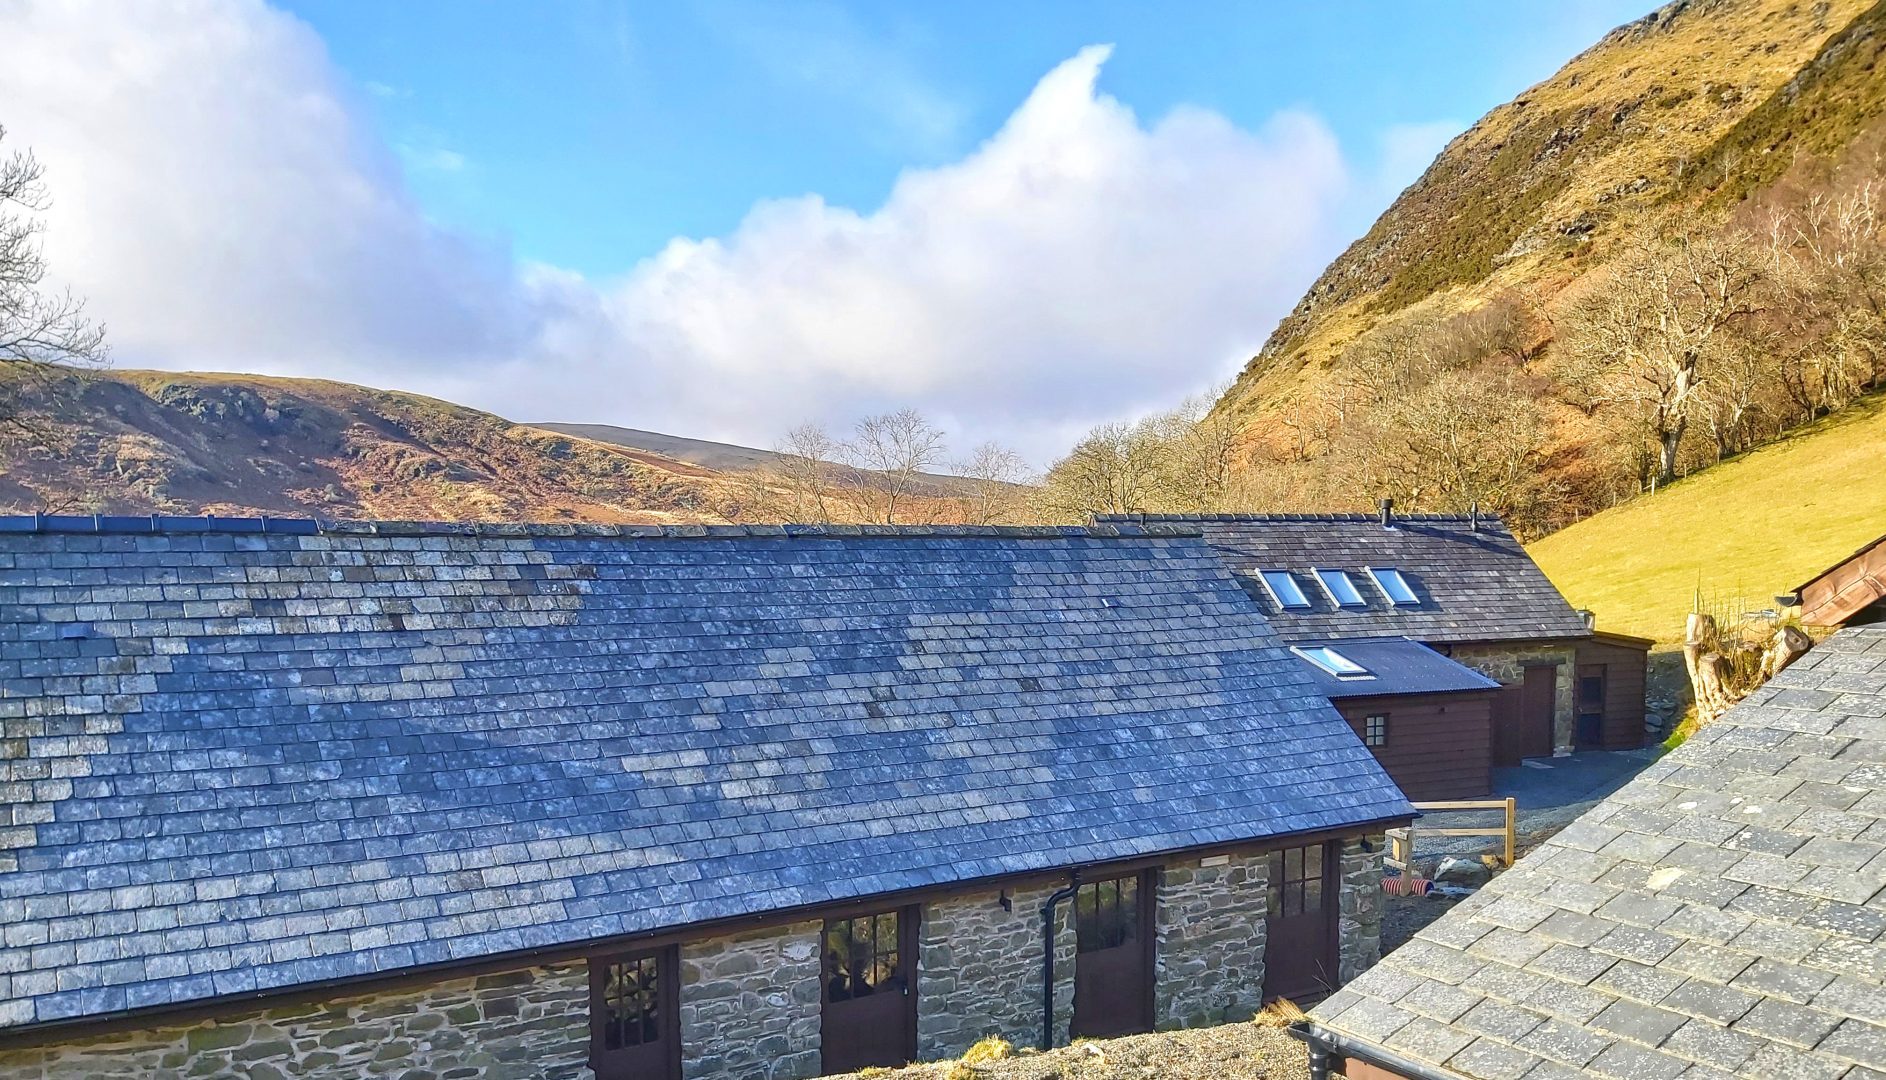 One long stone bunkhouse building with hills behind